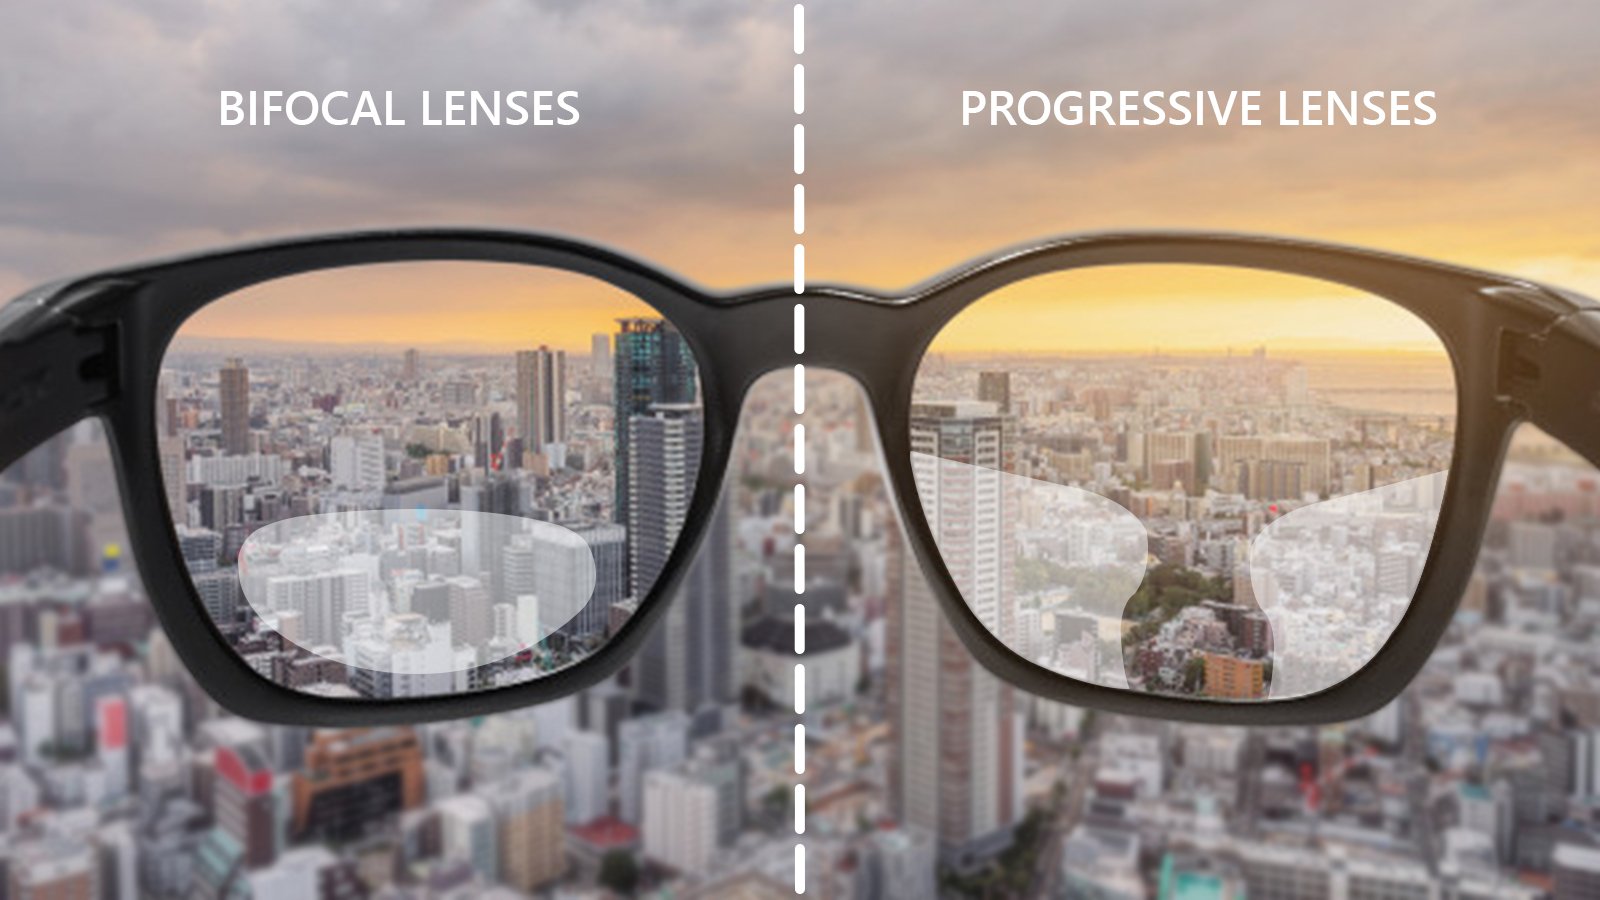 What is the difference between bifocal and progressive lenses?